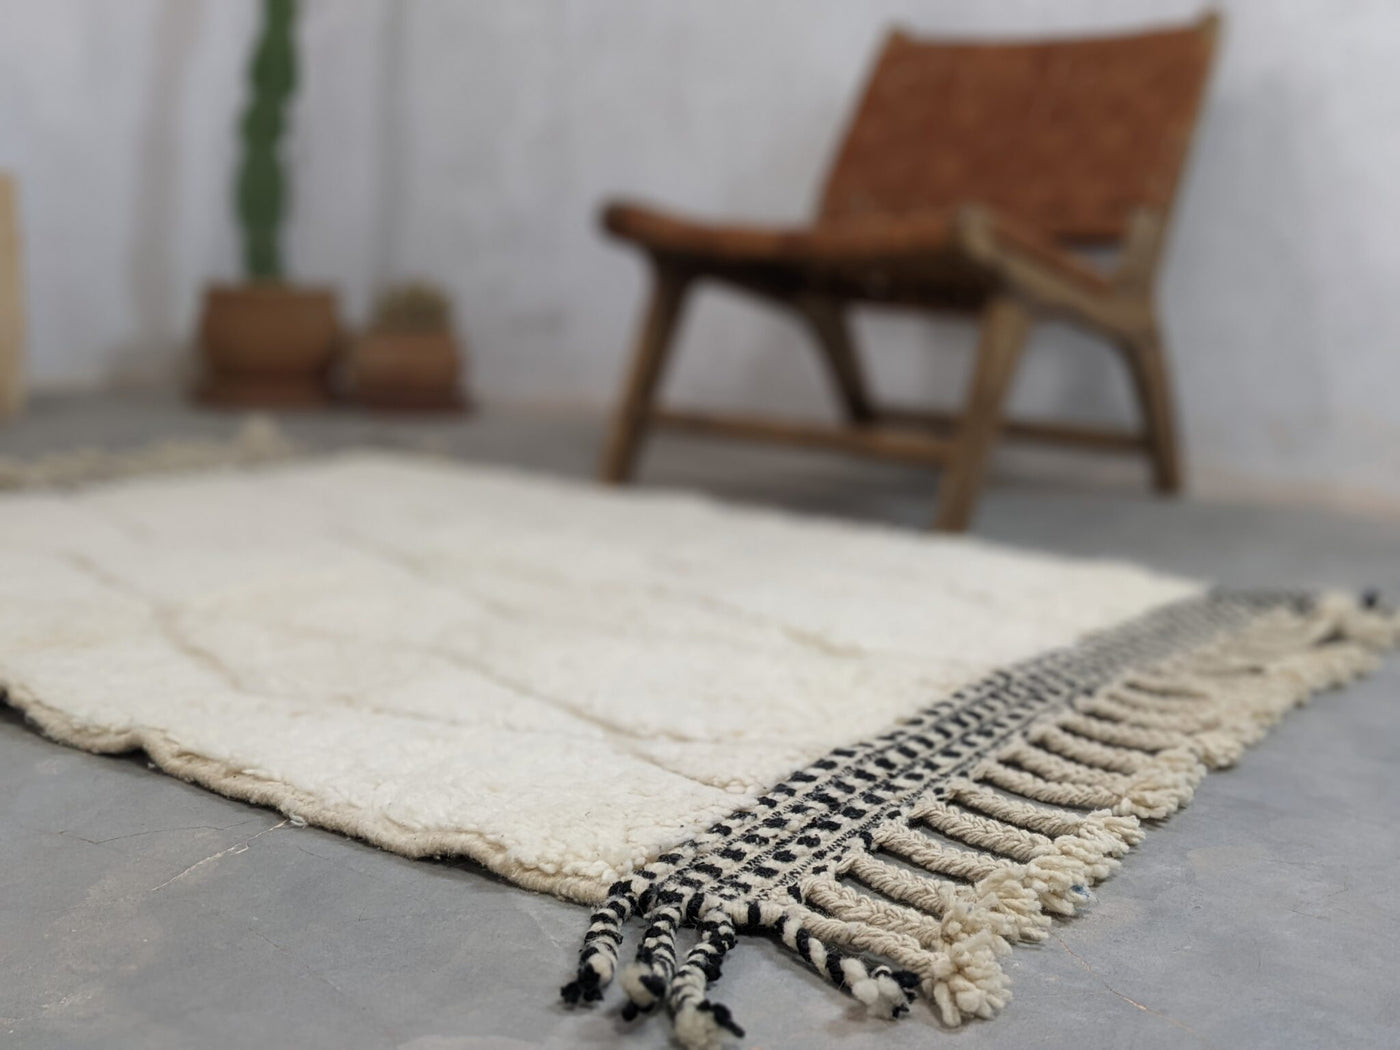 Small Moroccan Rugs - Berber Handwoven Rugs for Home Décor (144 x 112 cm)